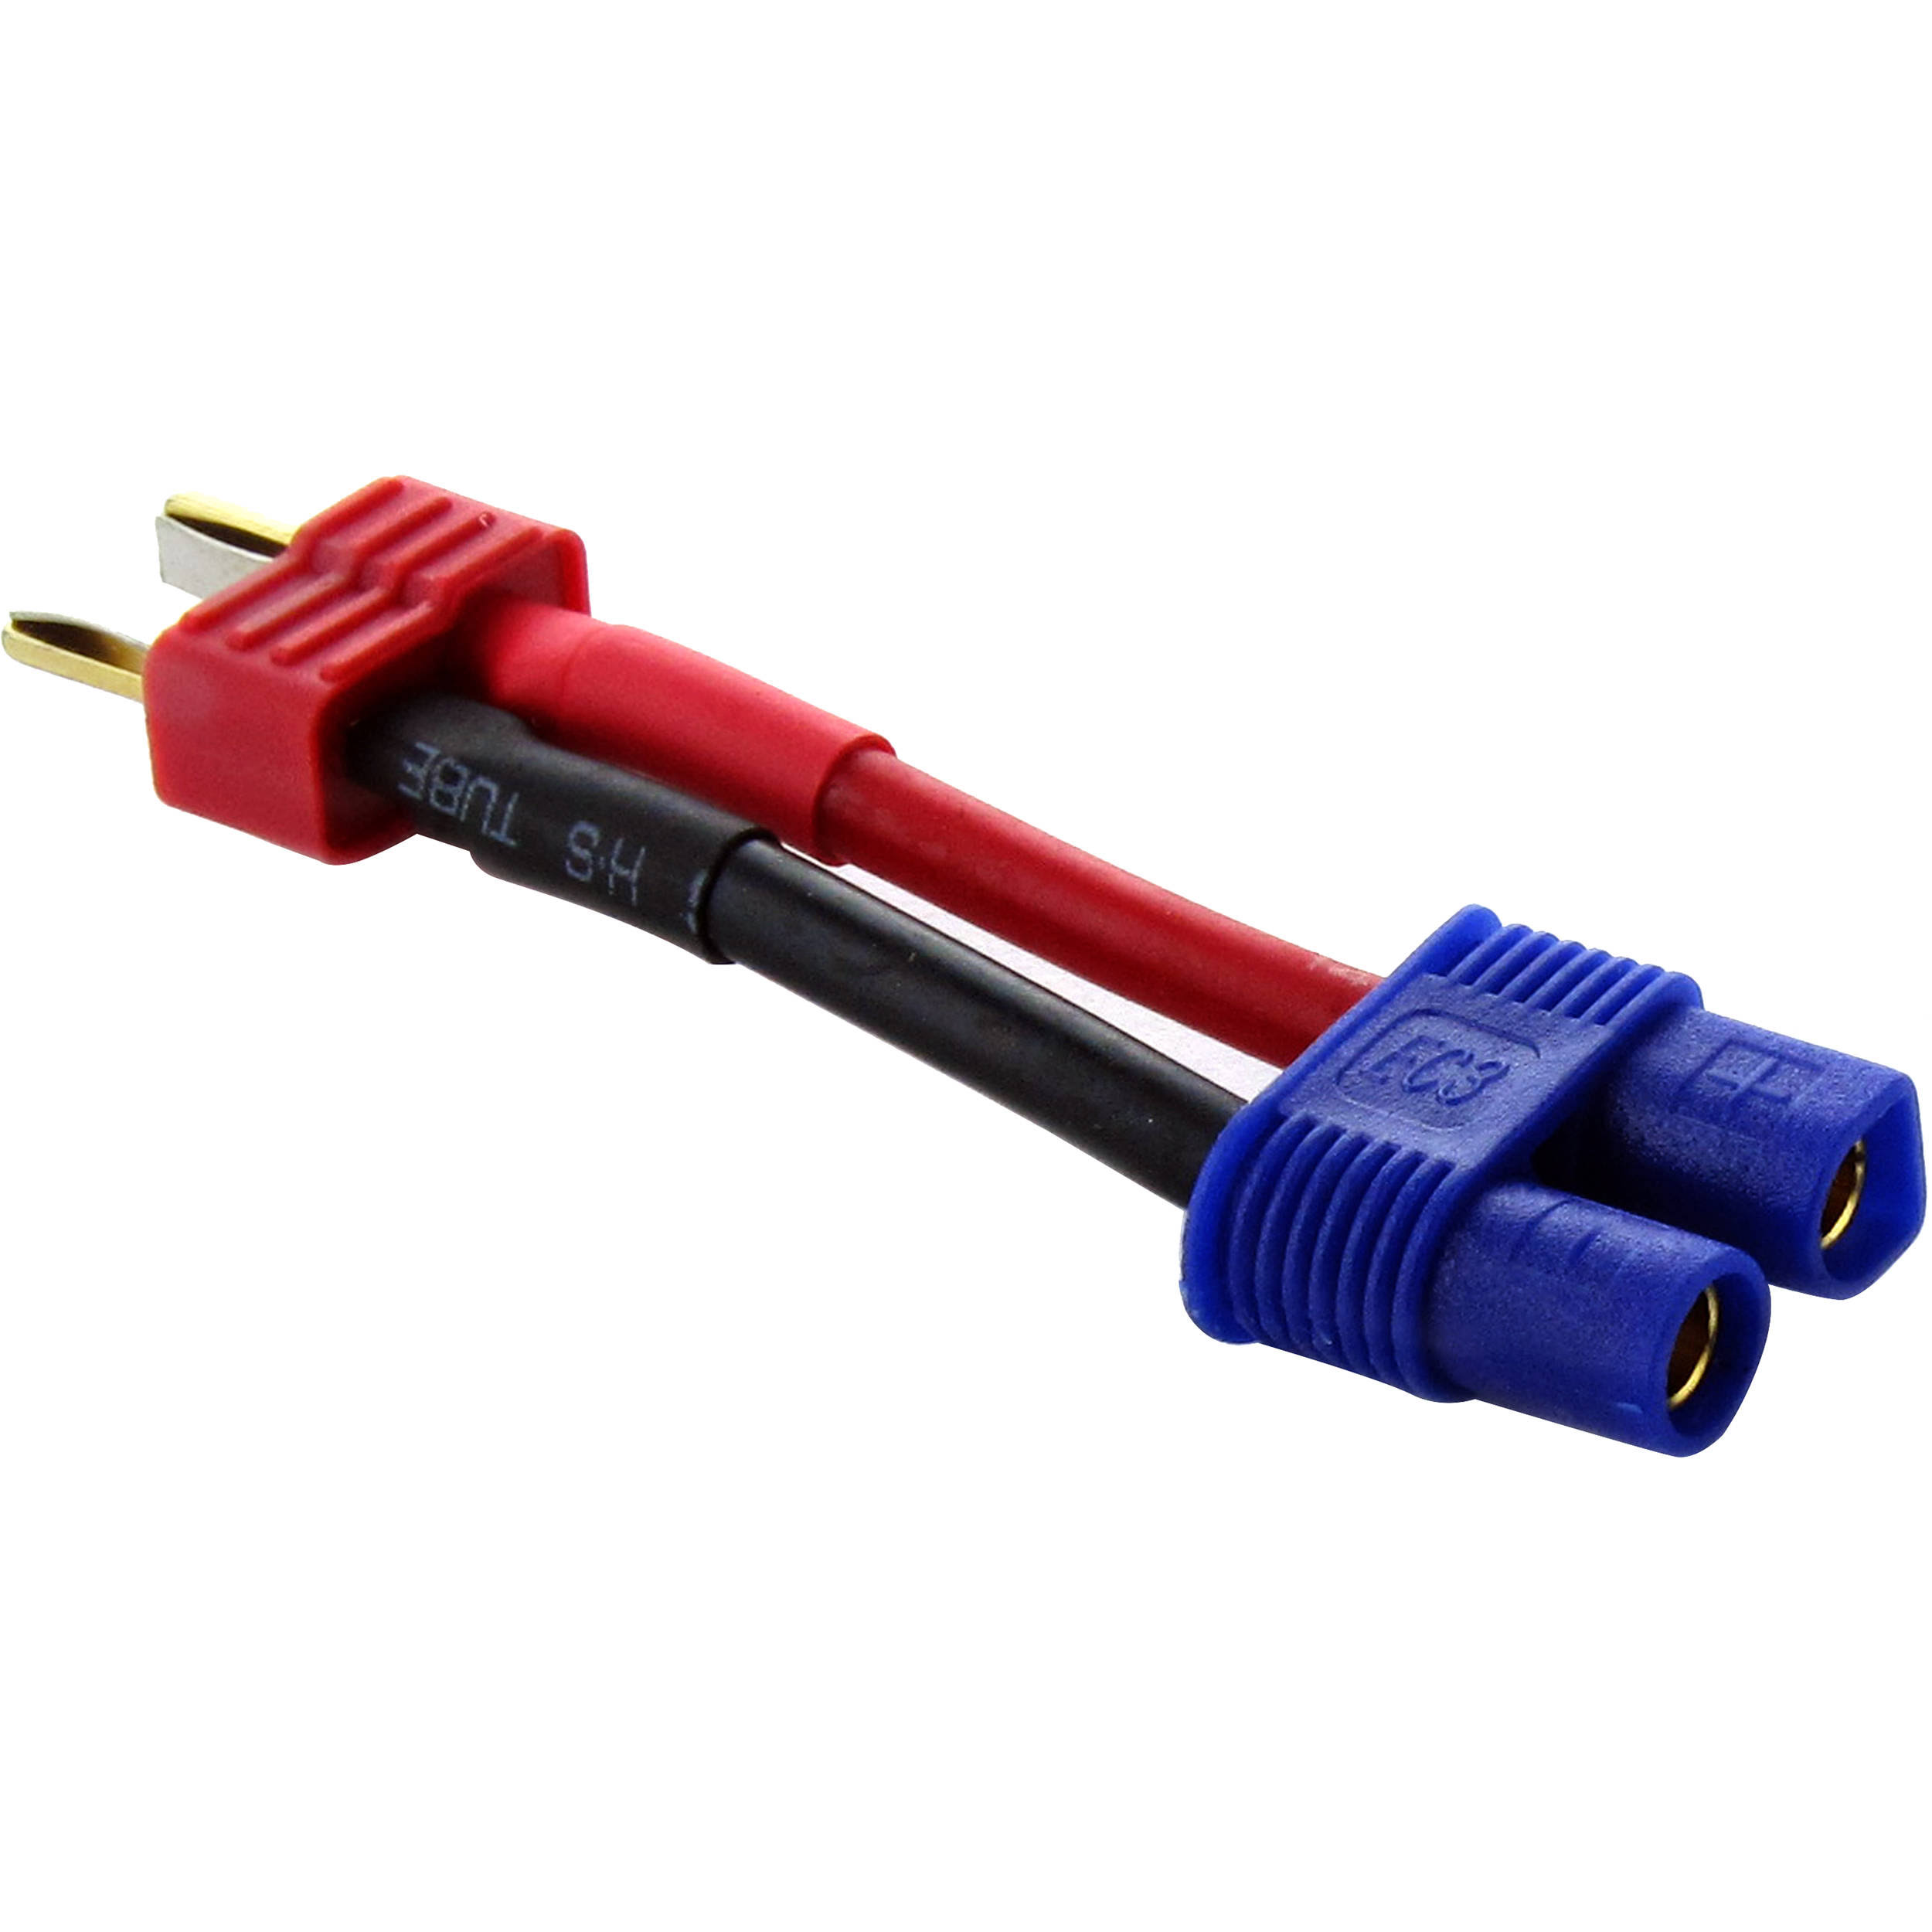 Common Sense RC EC3 Female to Deans-type Male Conversion Adapter - Blue/Red/Black